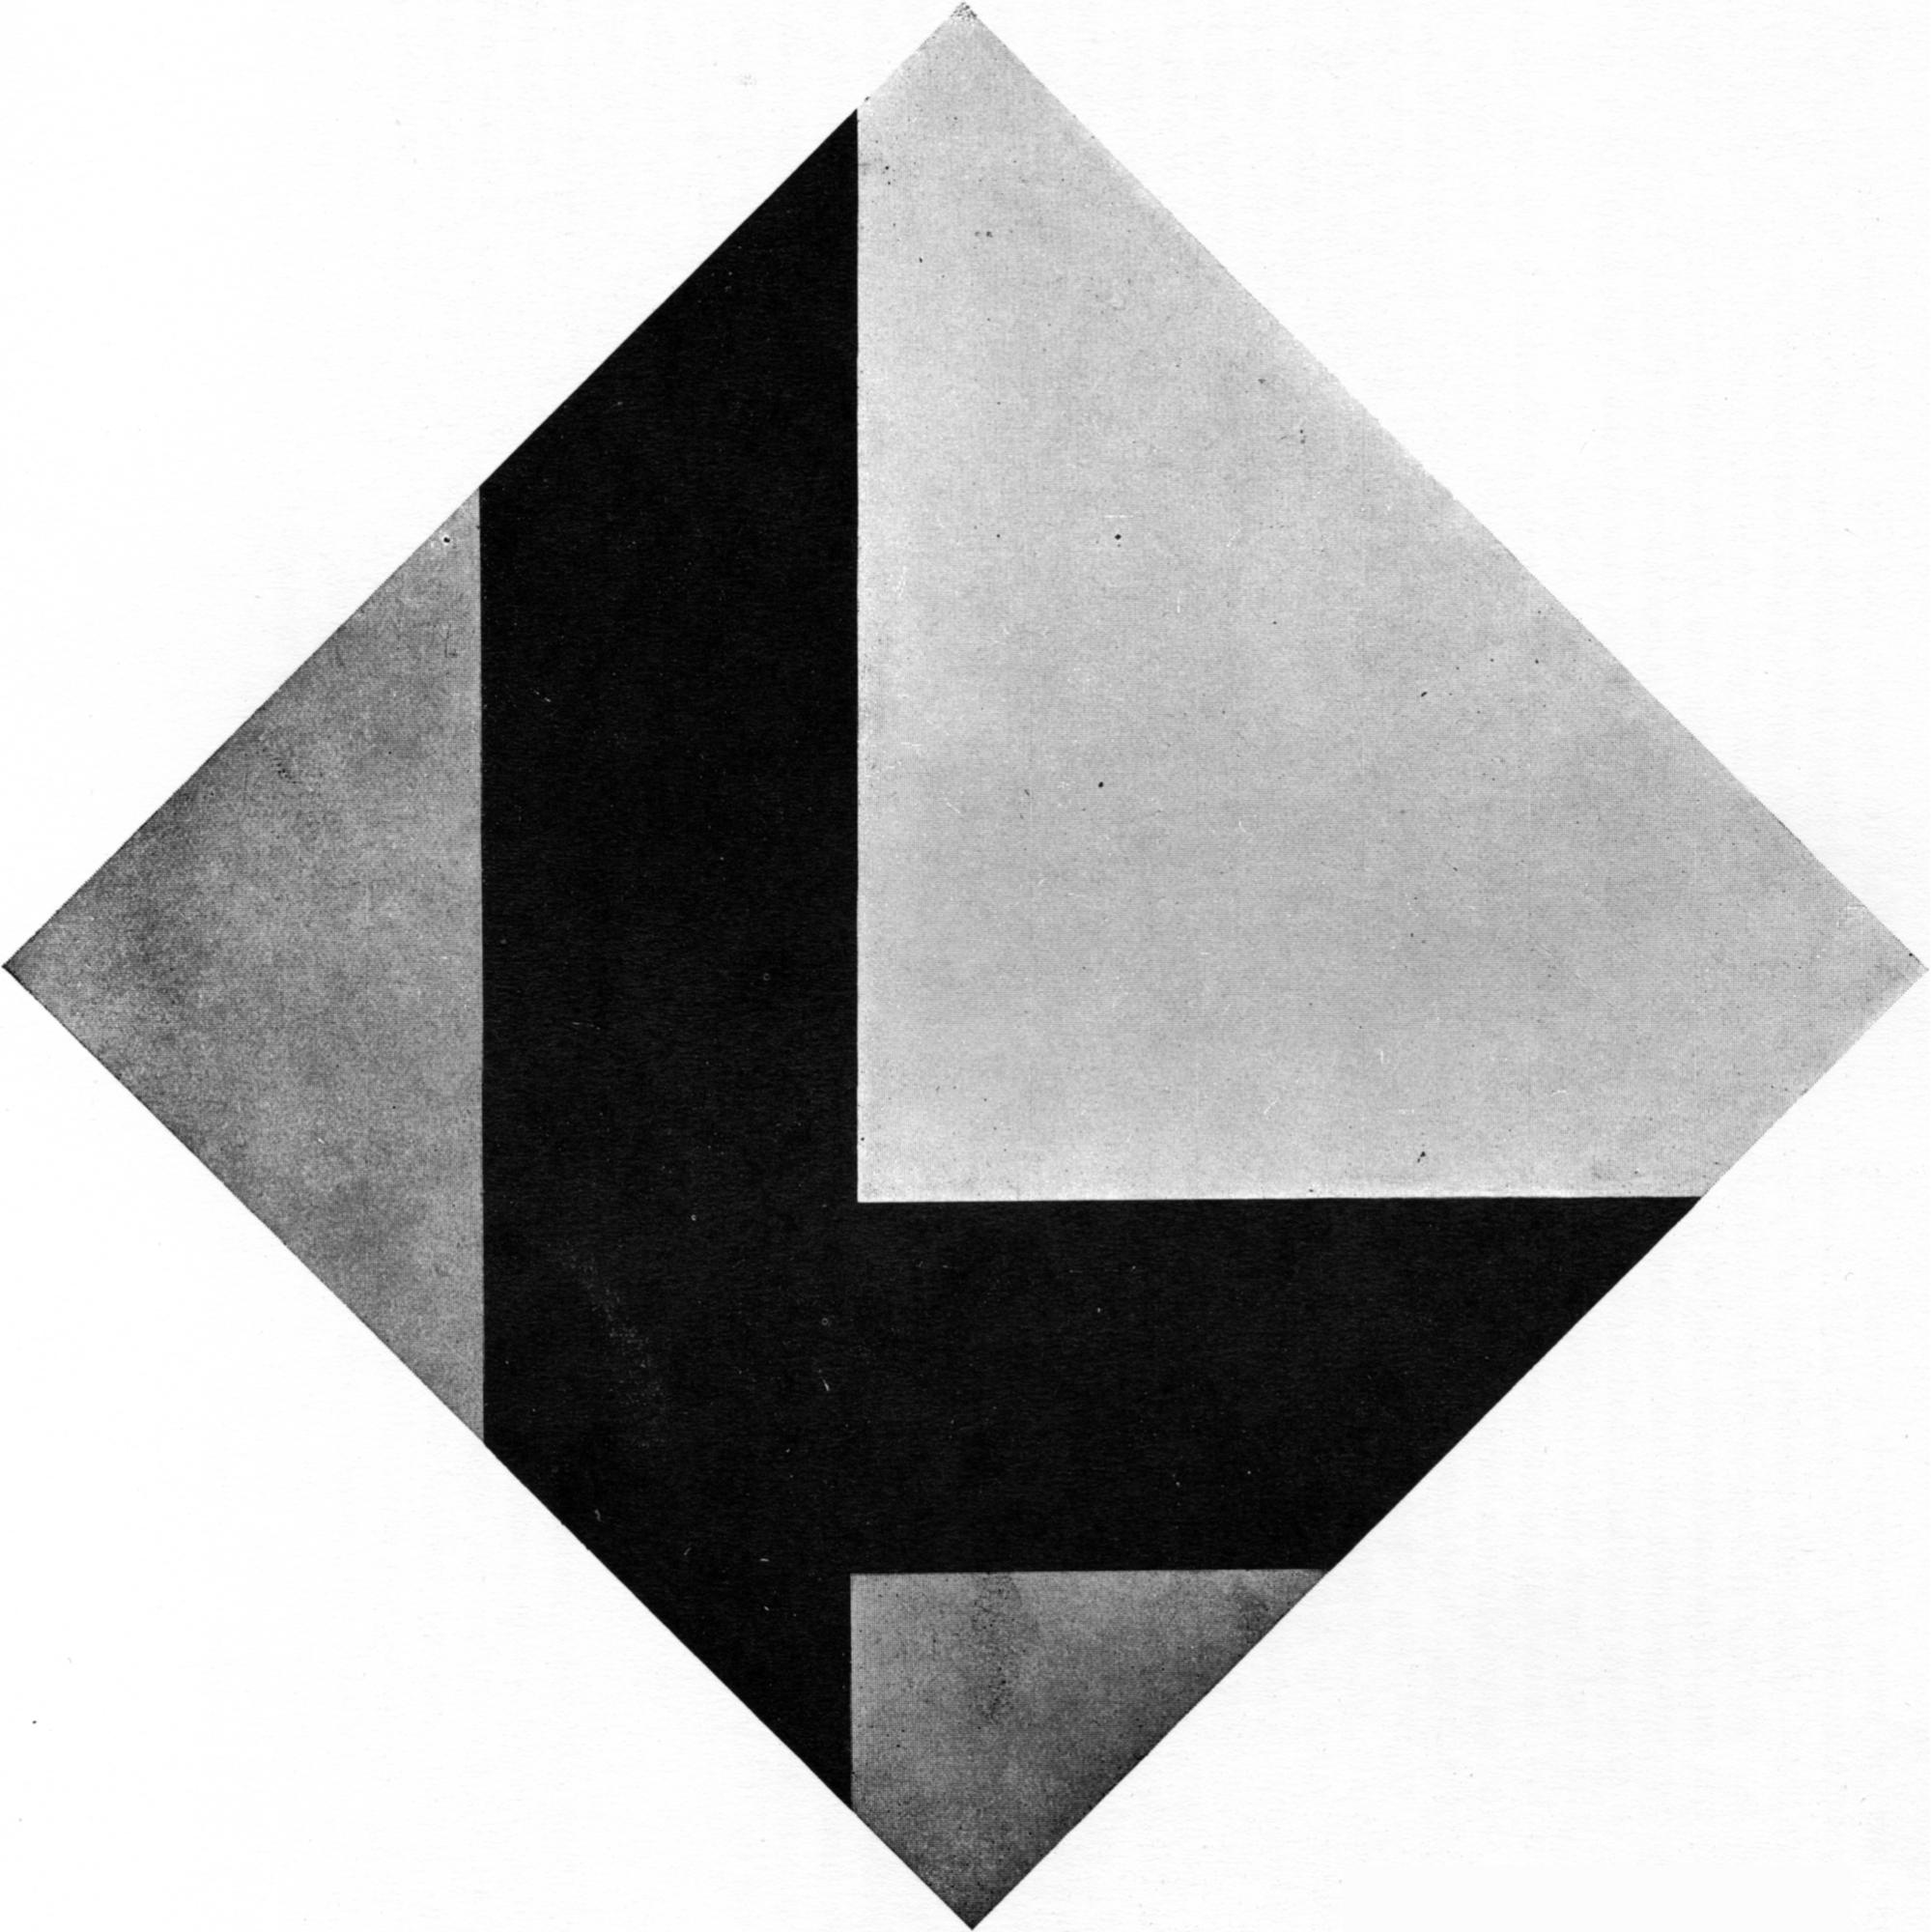 Counter composition VIII - Theo van Doesburg - WikiArt.org ...